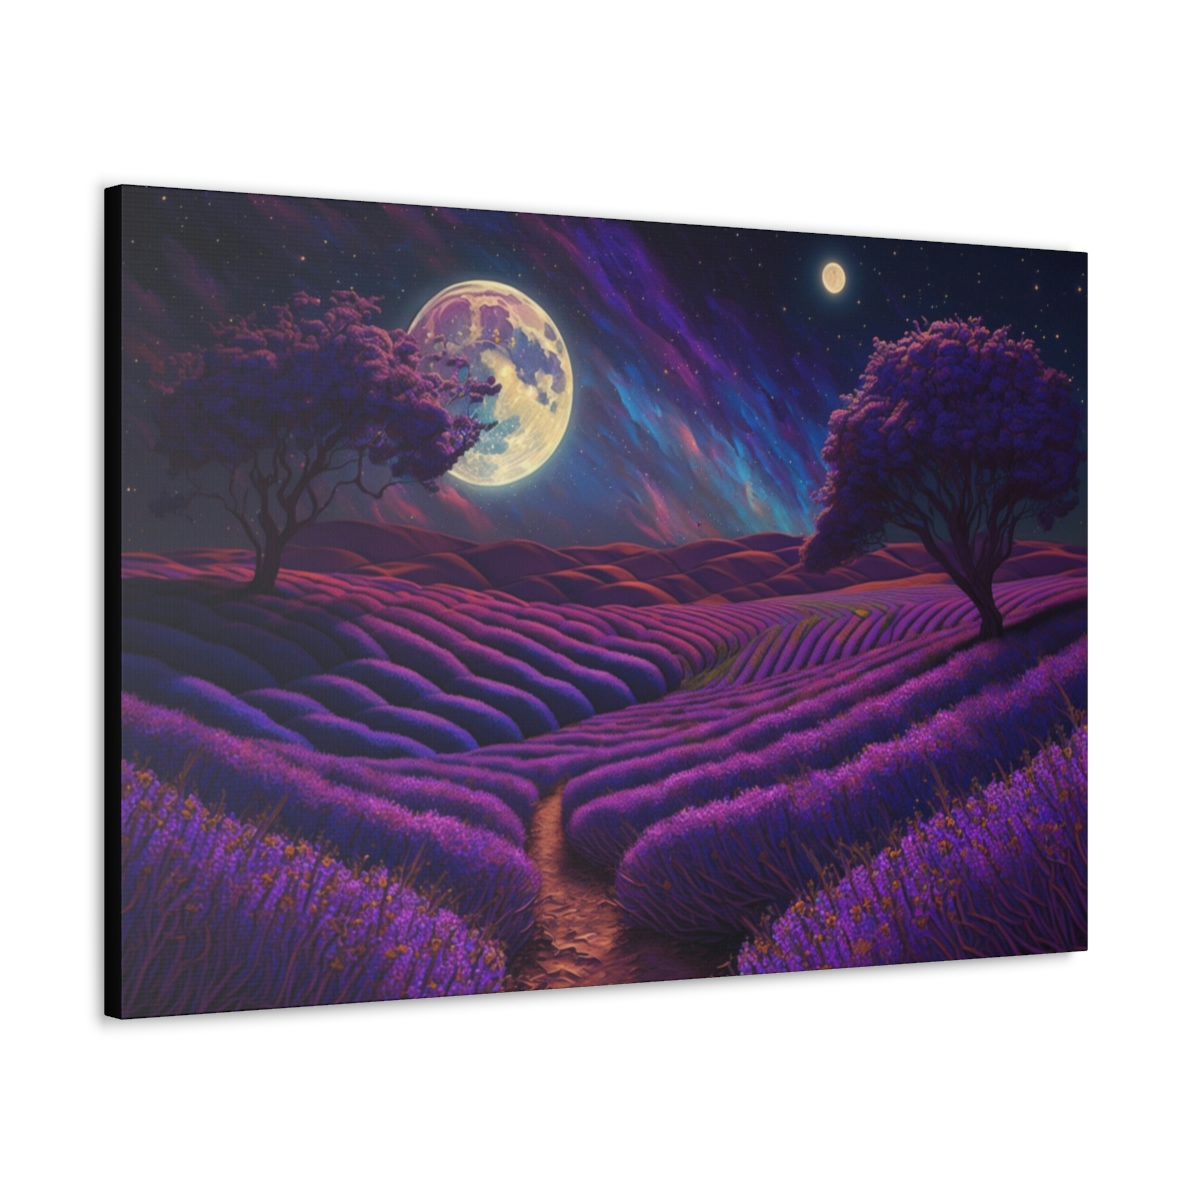 Trippy Art Canvas Print: The Violet Meadow